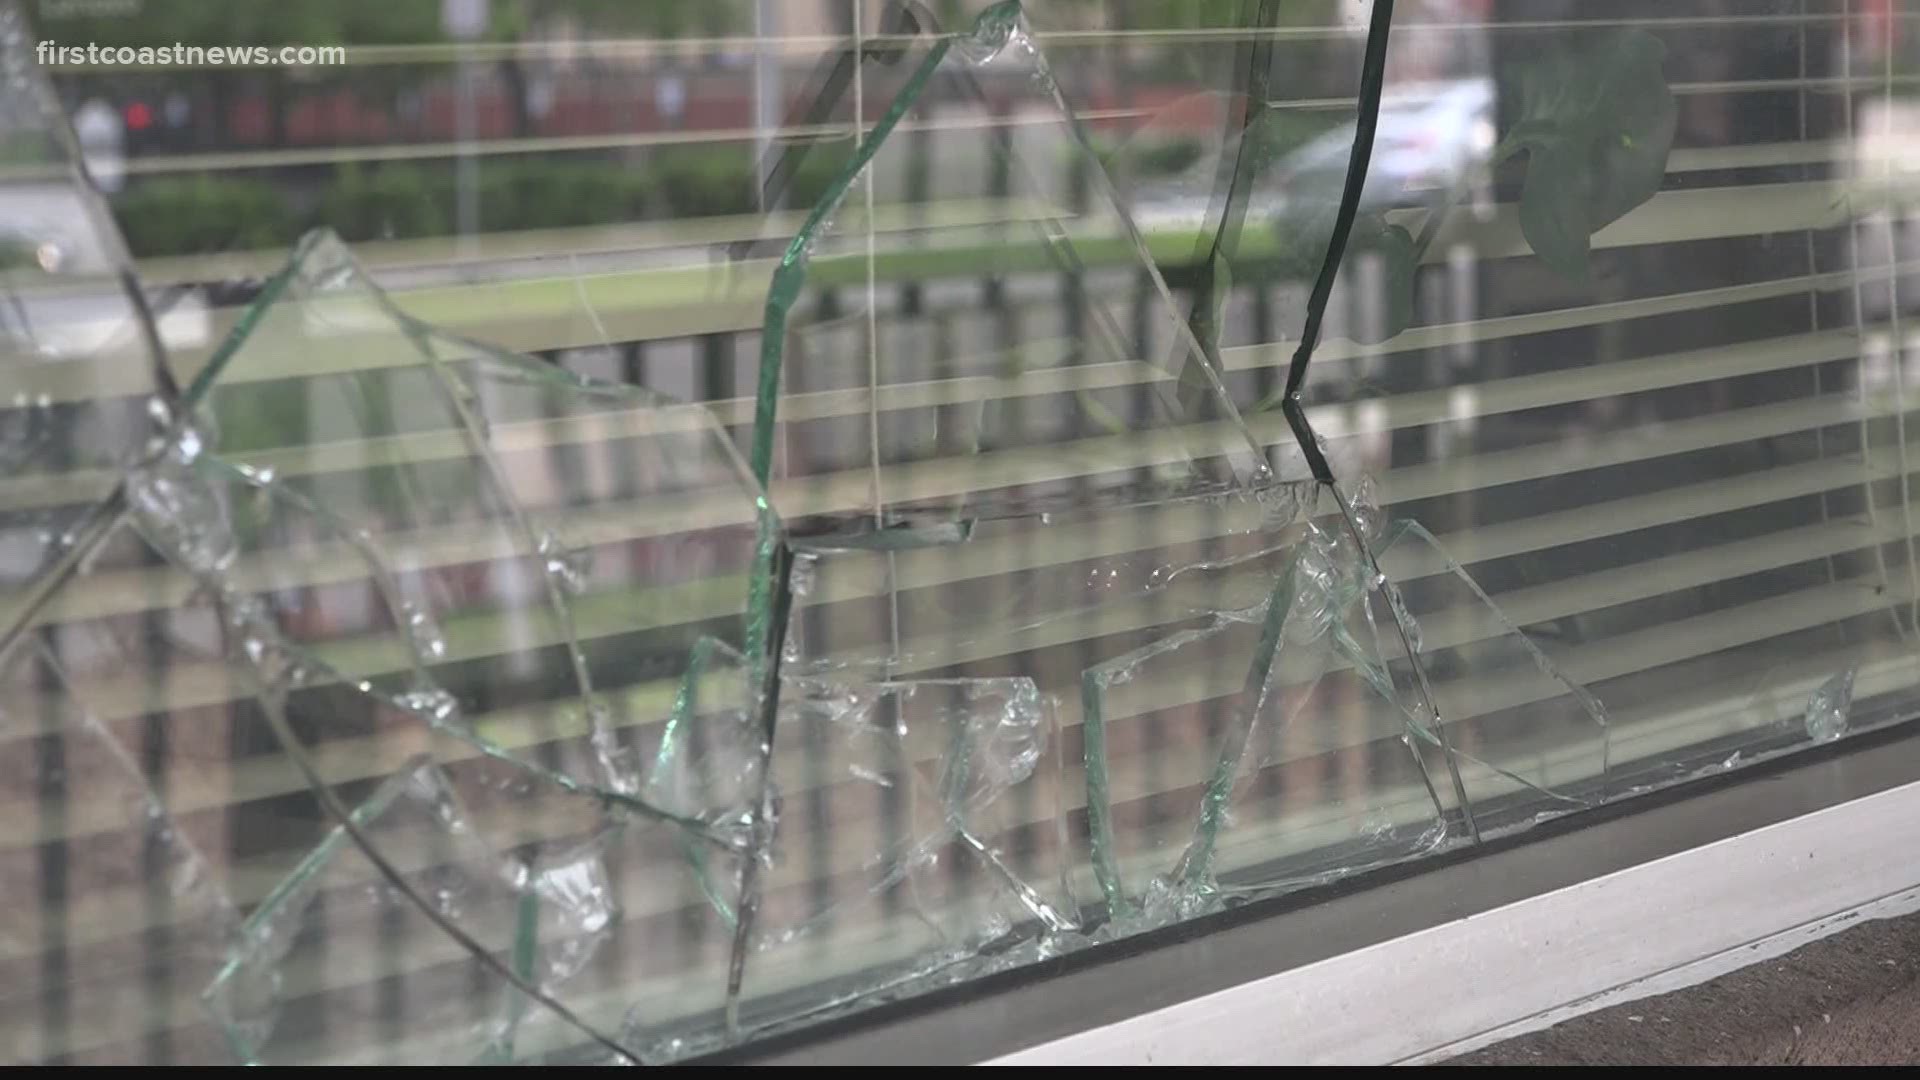 Saturday's protest in downtown Jacksonville quickly went from peaceful to destructive. Businesses have been cleaning up shattered windows and spray paint.